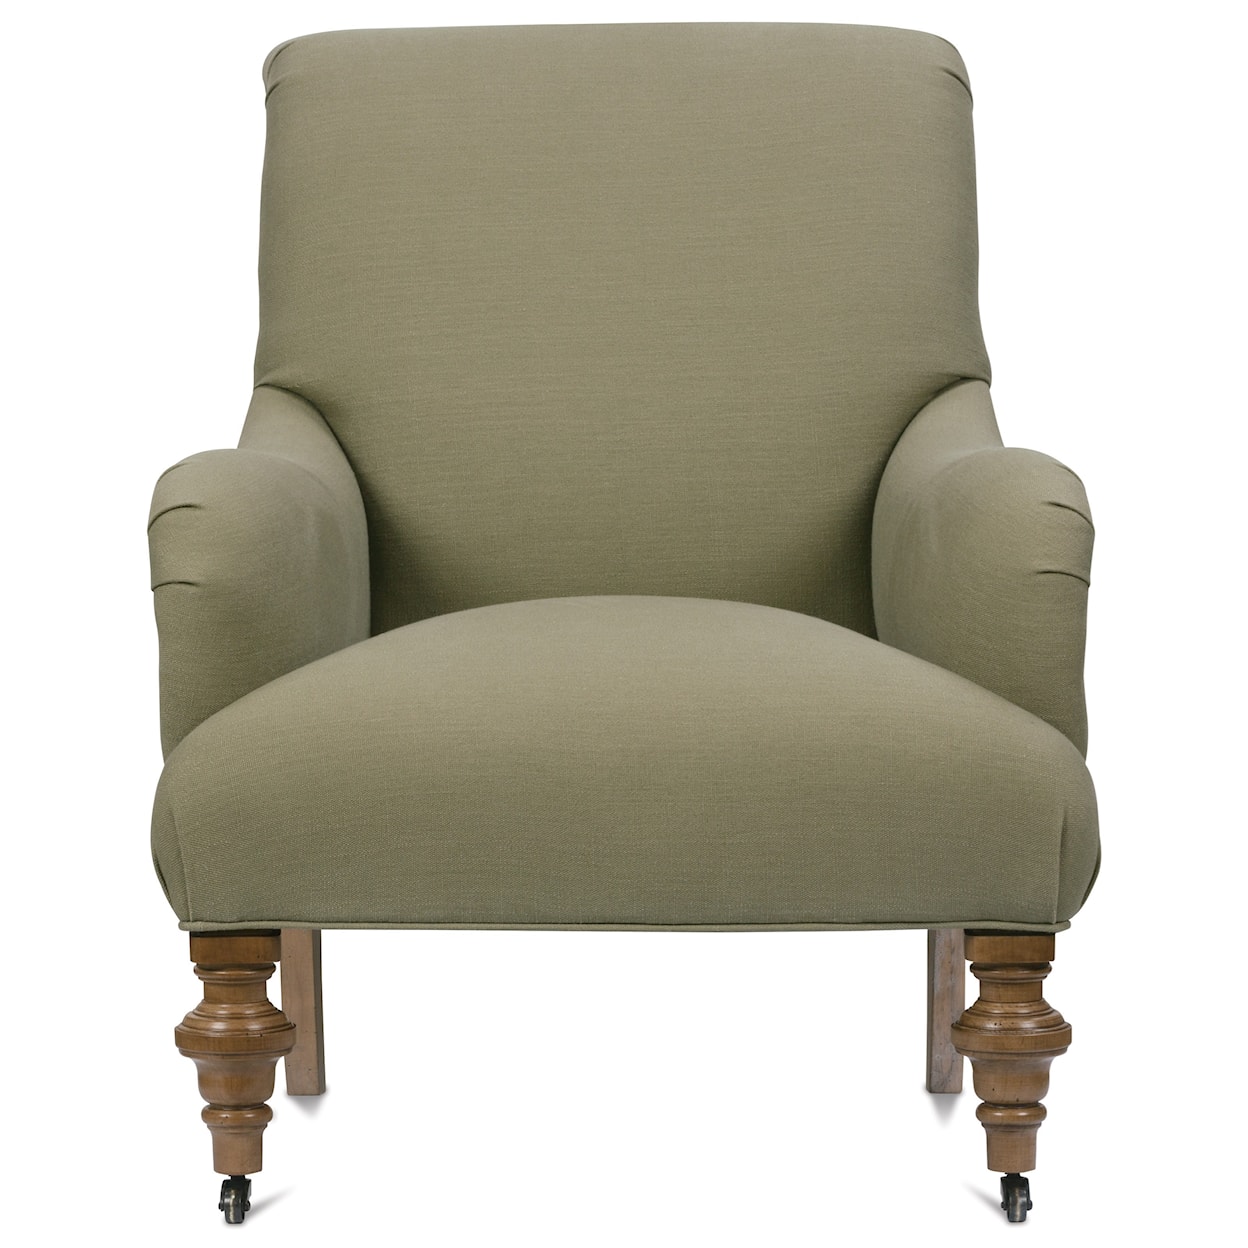 Rowe Chairs and Accents Carlyle Upholstered Chair